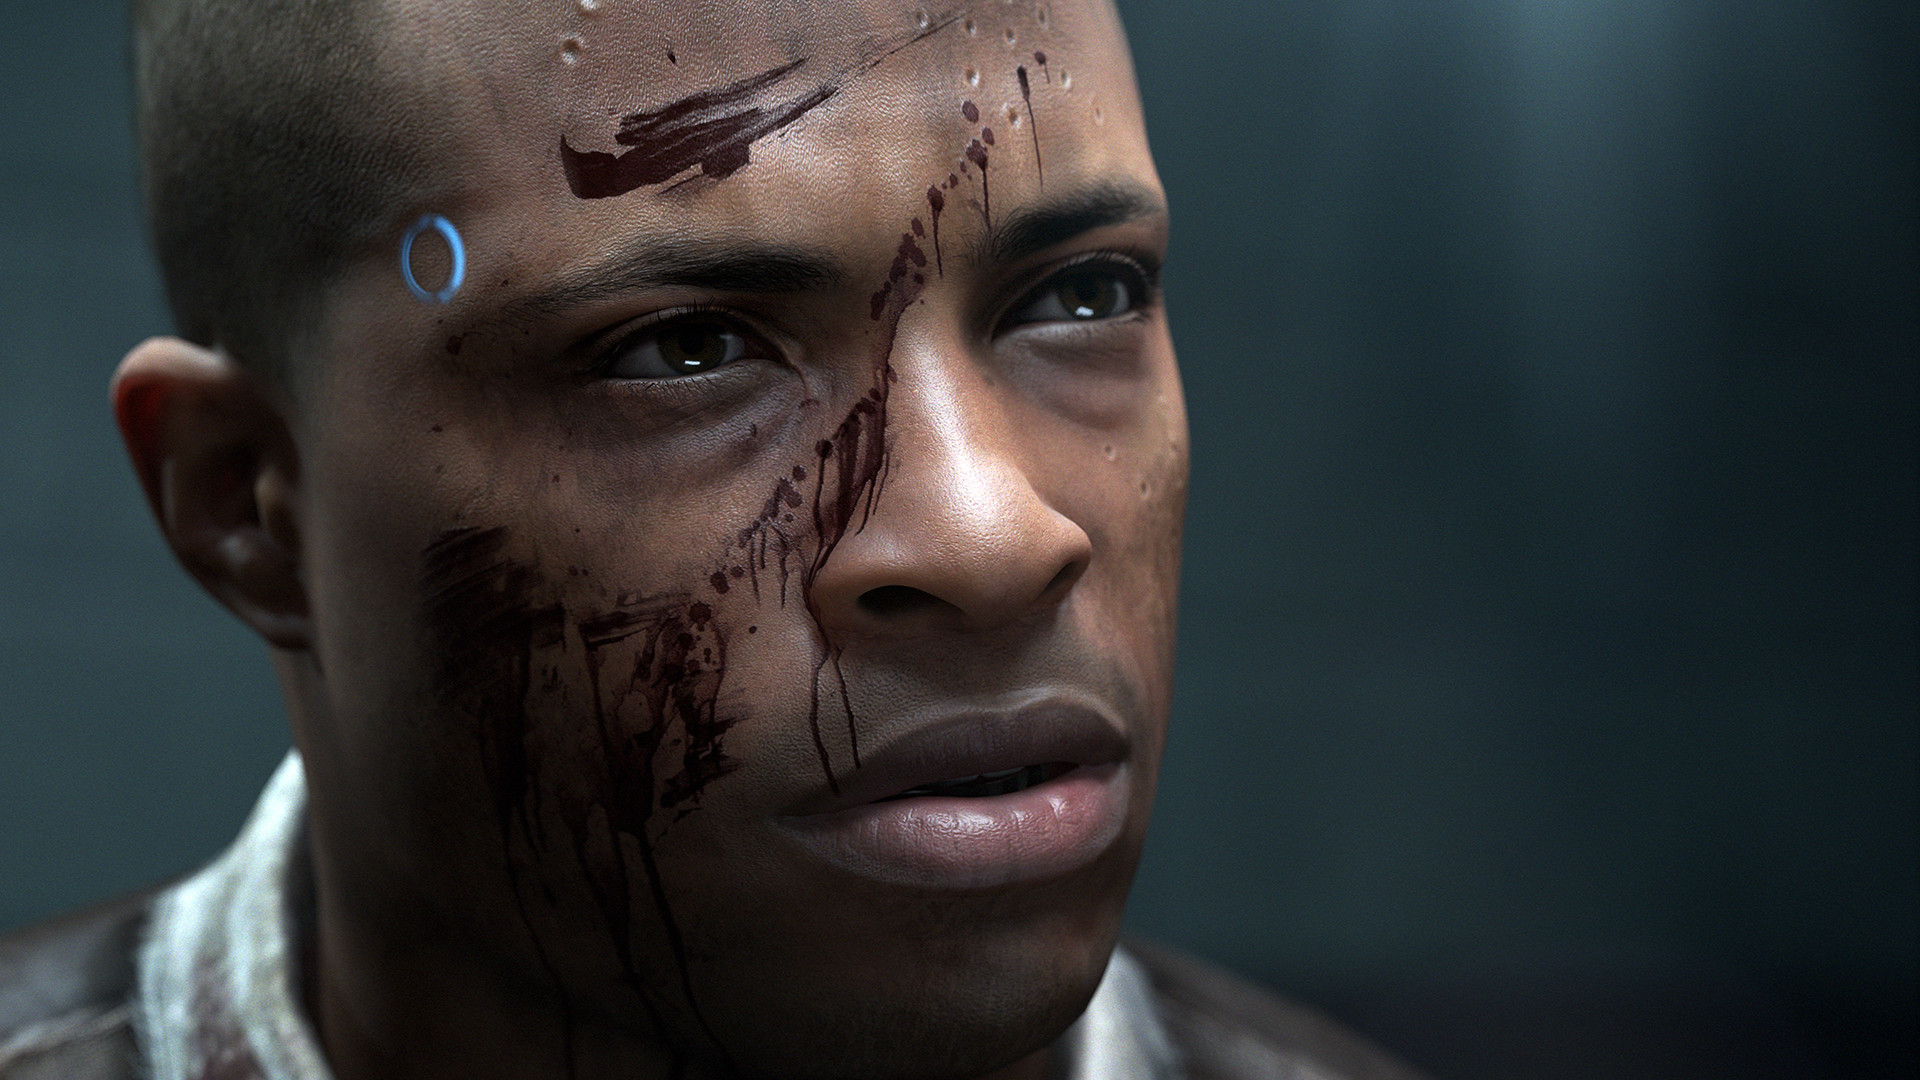 Save 30% on Detroit: Become Human on Steam